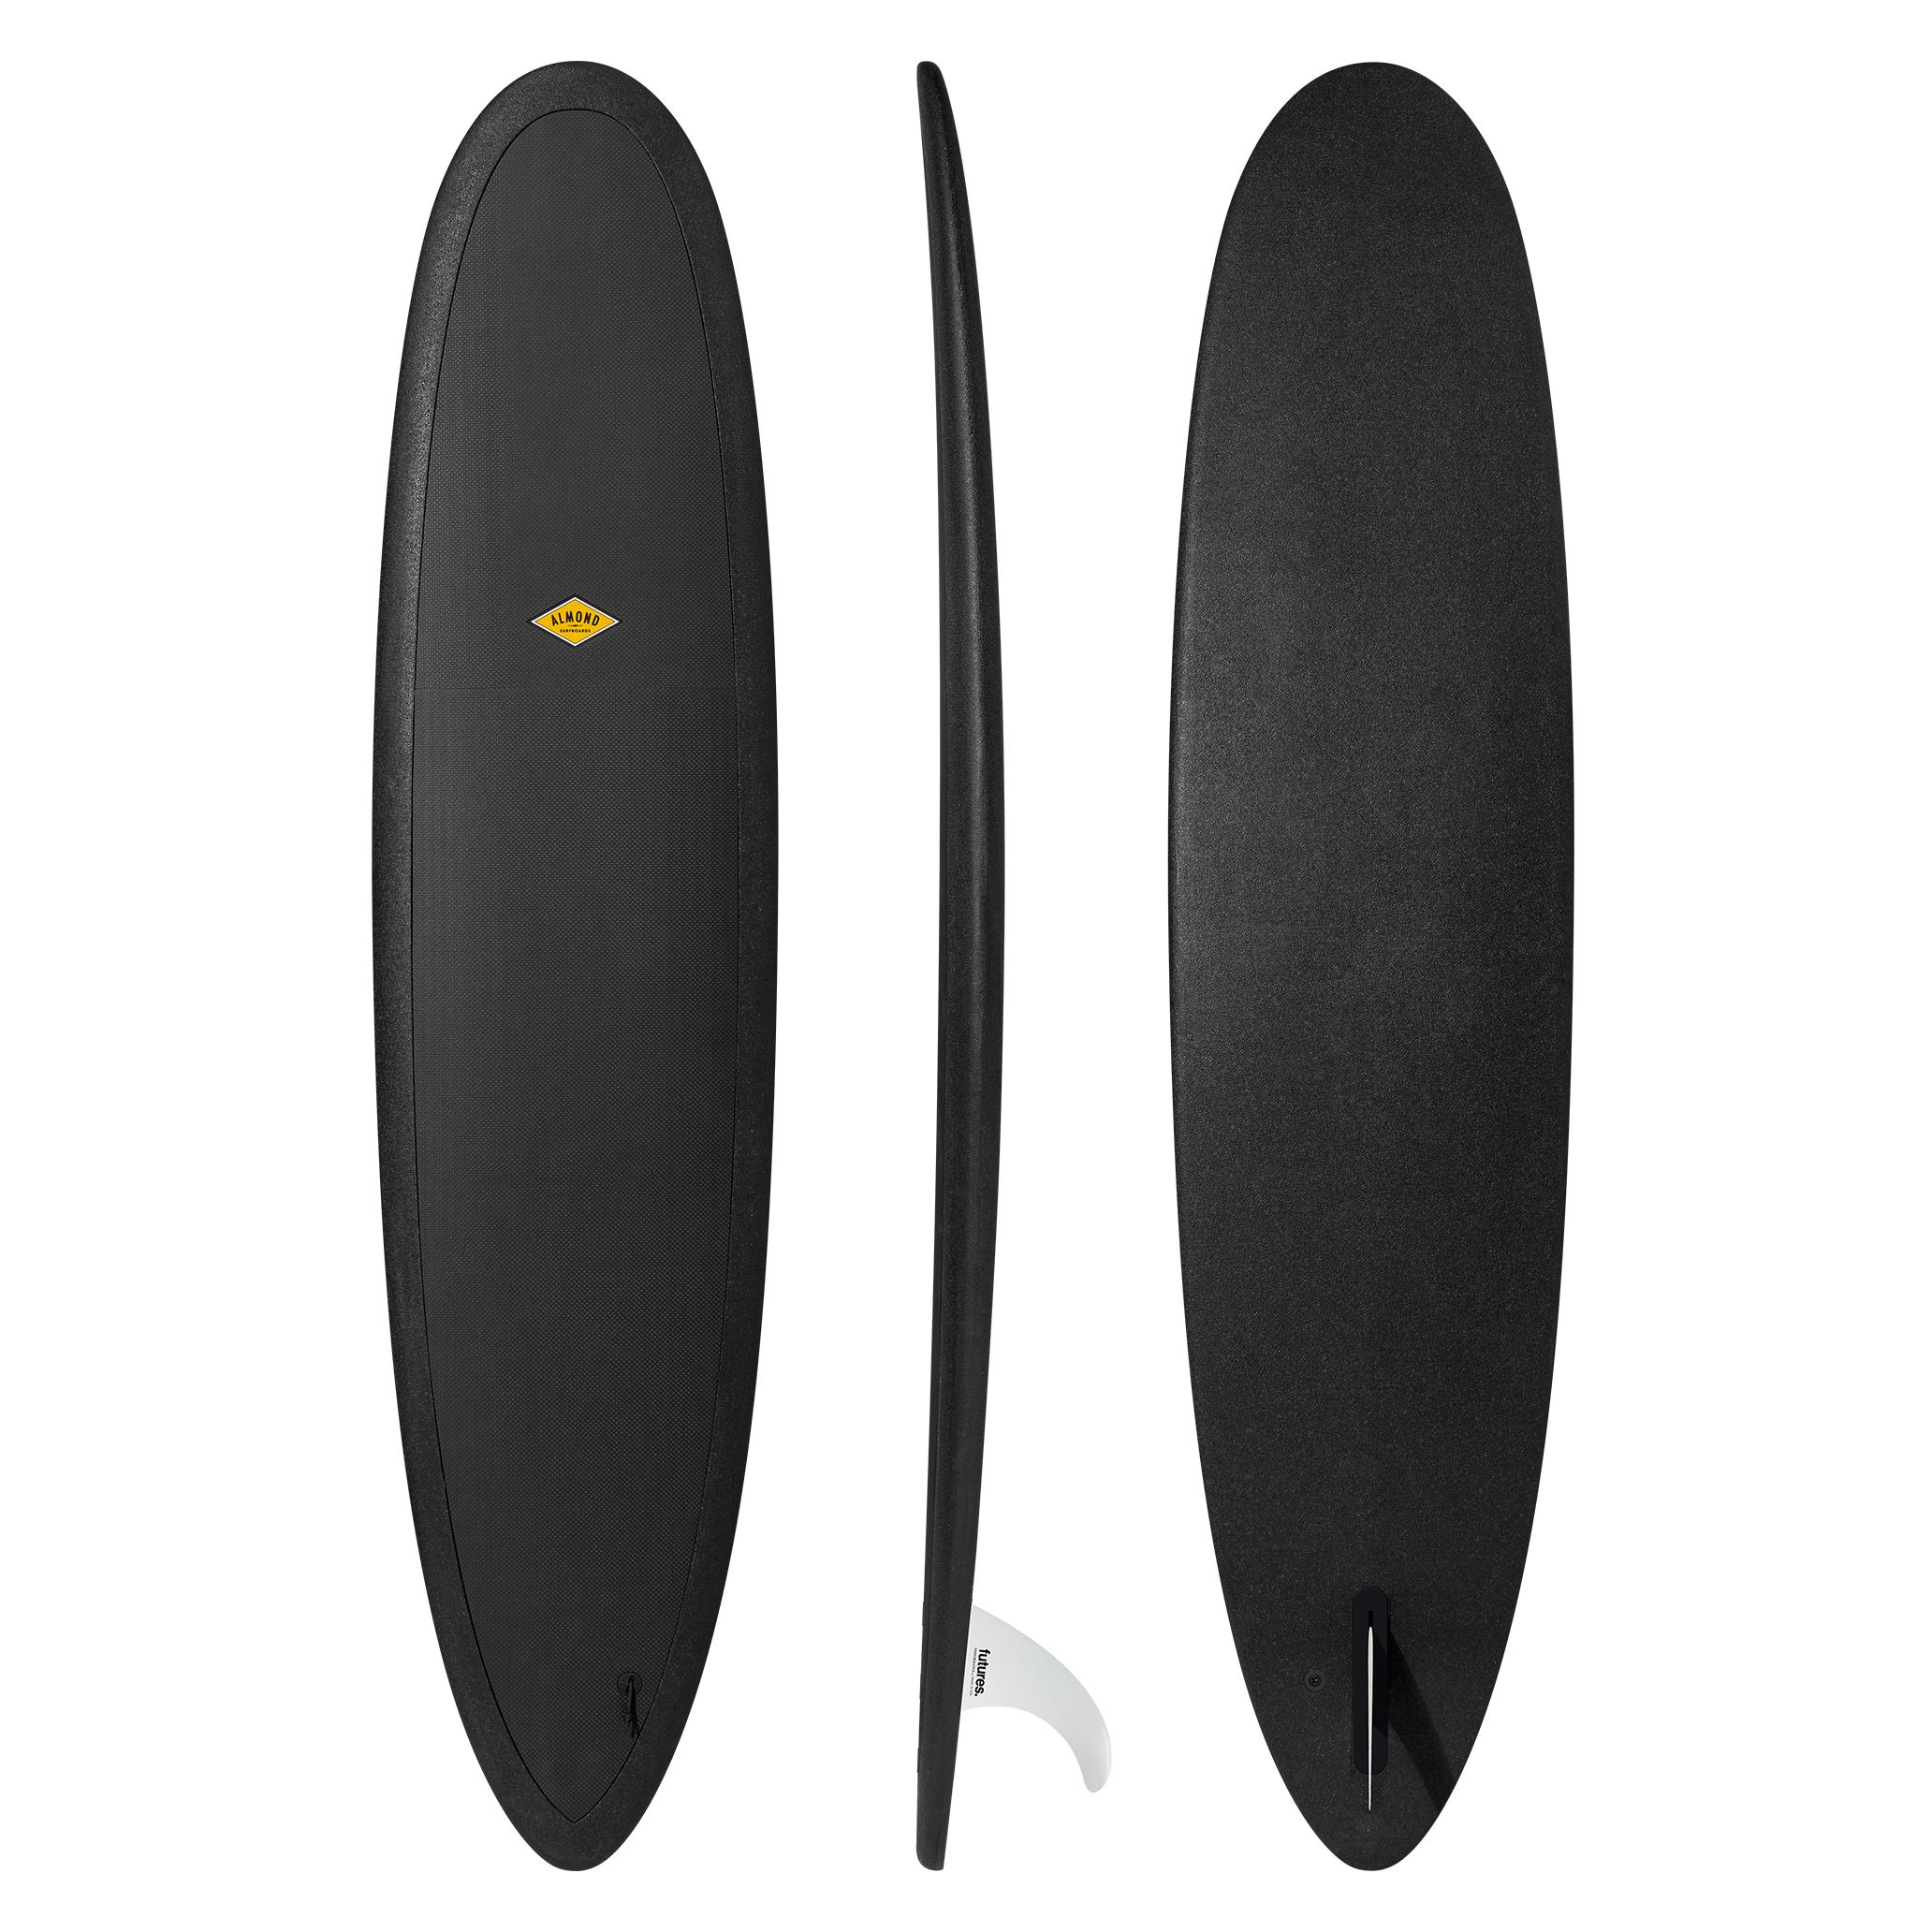 Front, Profile and back of a black 8 foot Almond Joy surfboard with a logo on a transparent background